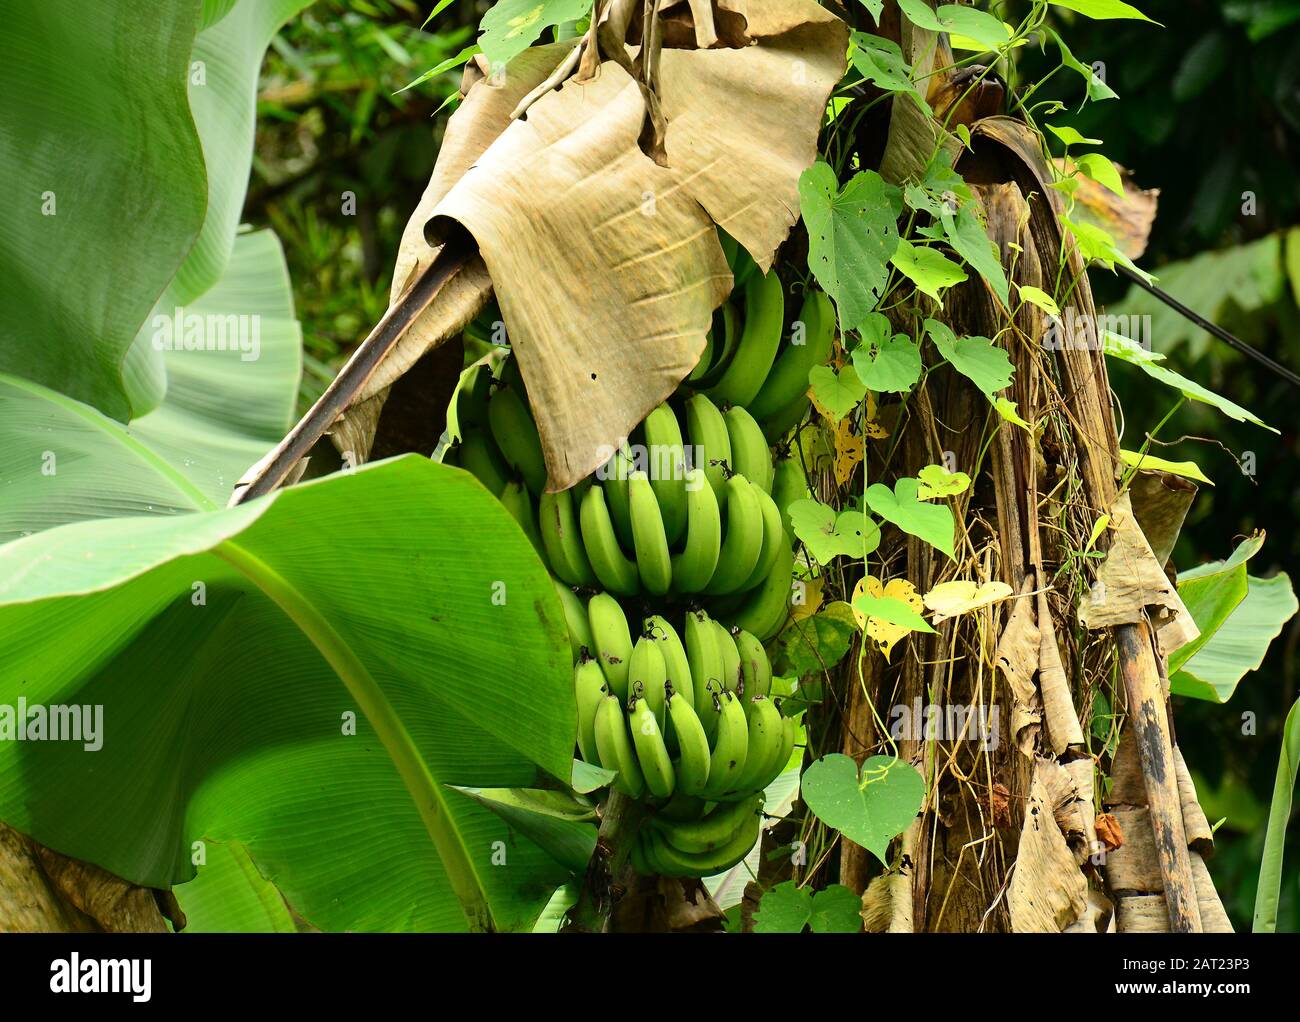 Bunch of plantain in a local grown. Valle del Cauca, Colombia Stock Photo